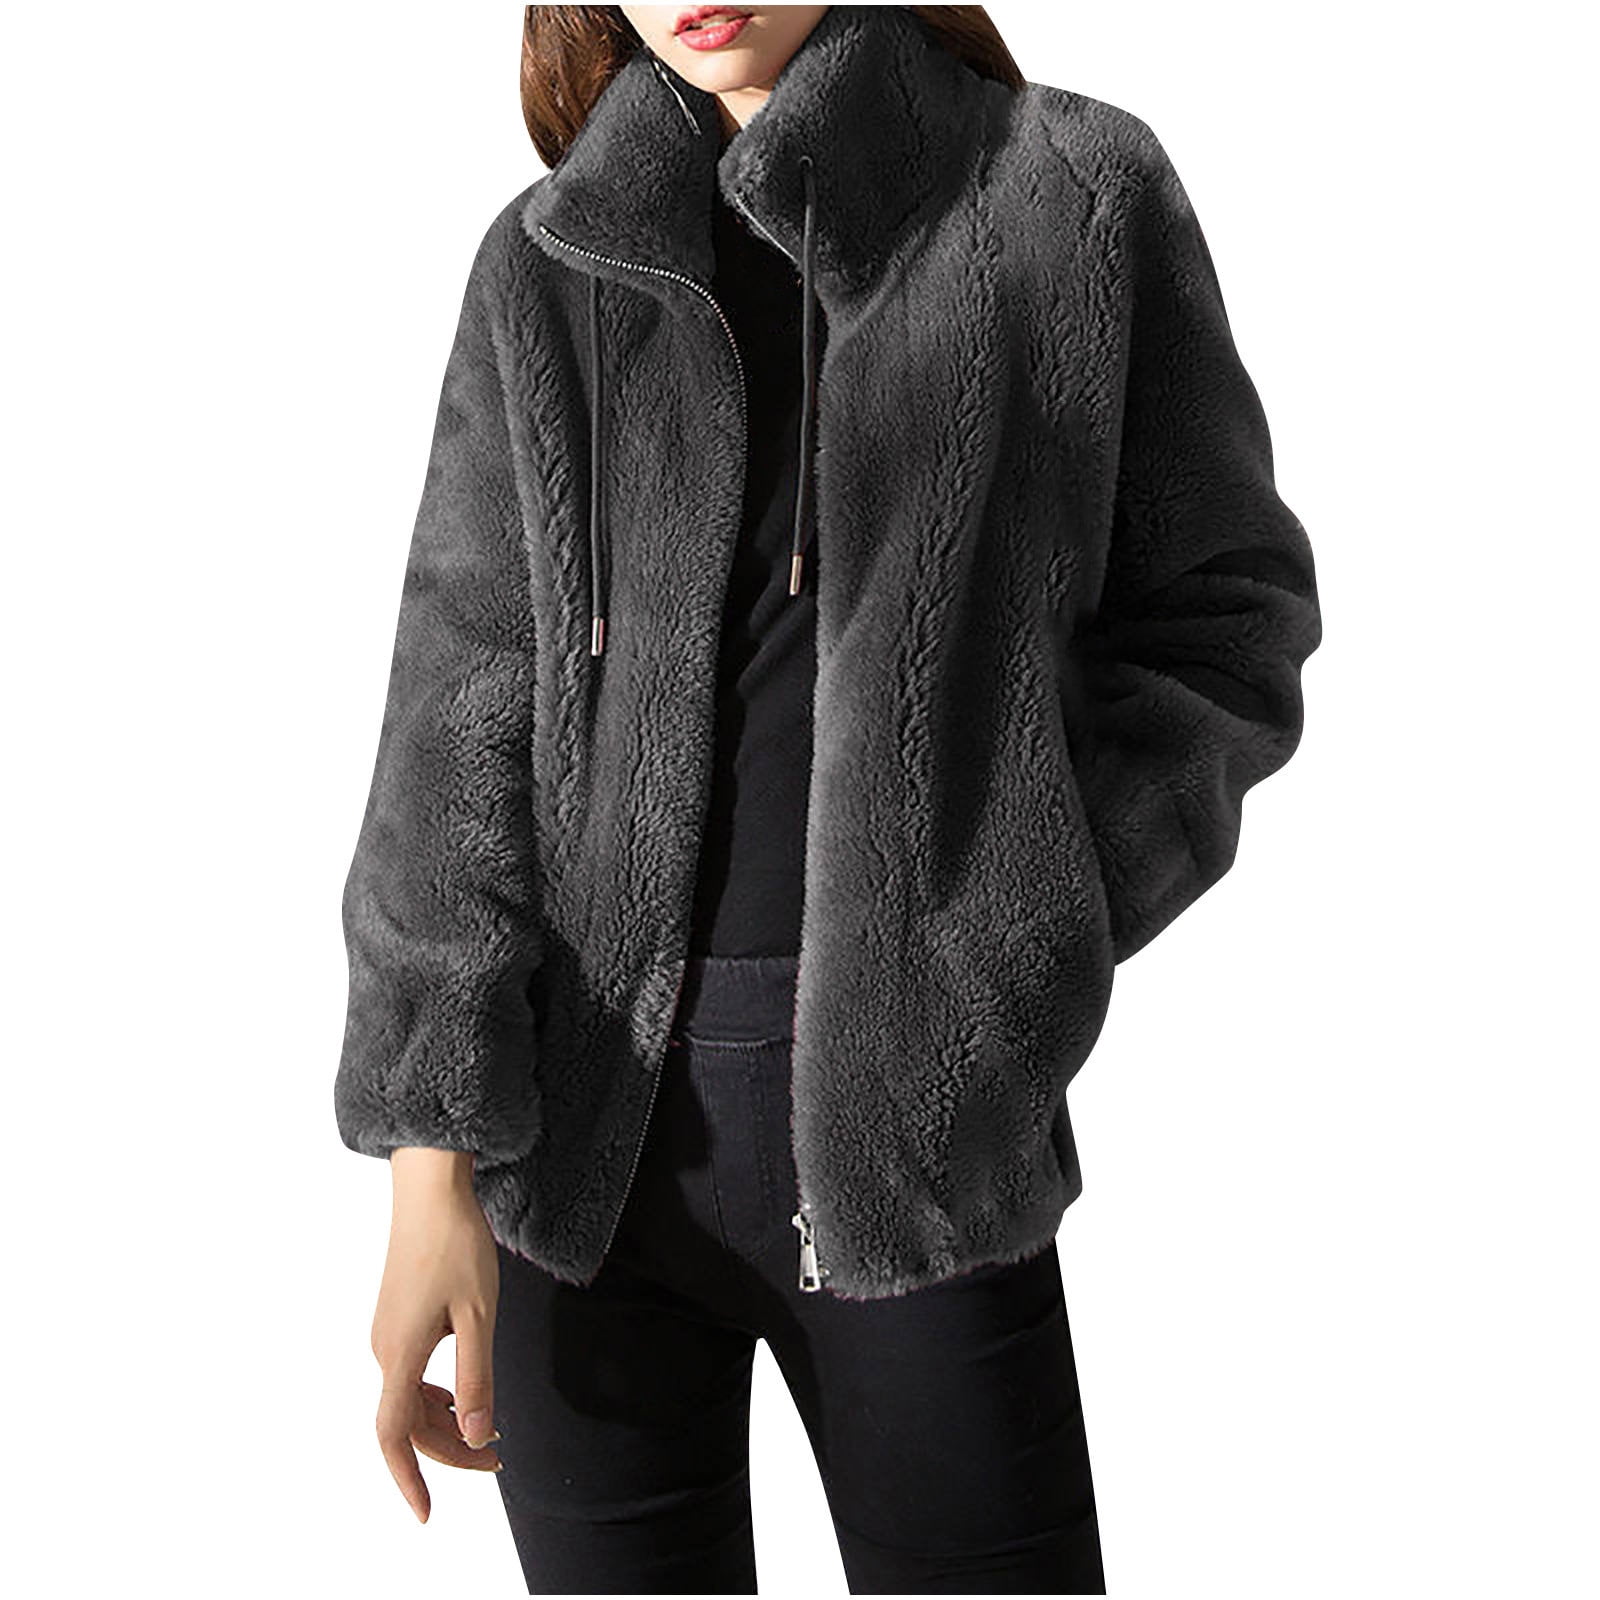  jsarle black of friday deals 2023  clearance items outlet  90 percent off Fleece Lined Jackets for Women Comfy Long Sleeve Sherpa  Sweatshirts Winter Warm Hoodie Flannel Pullover Sweater : Deportes